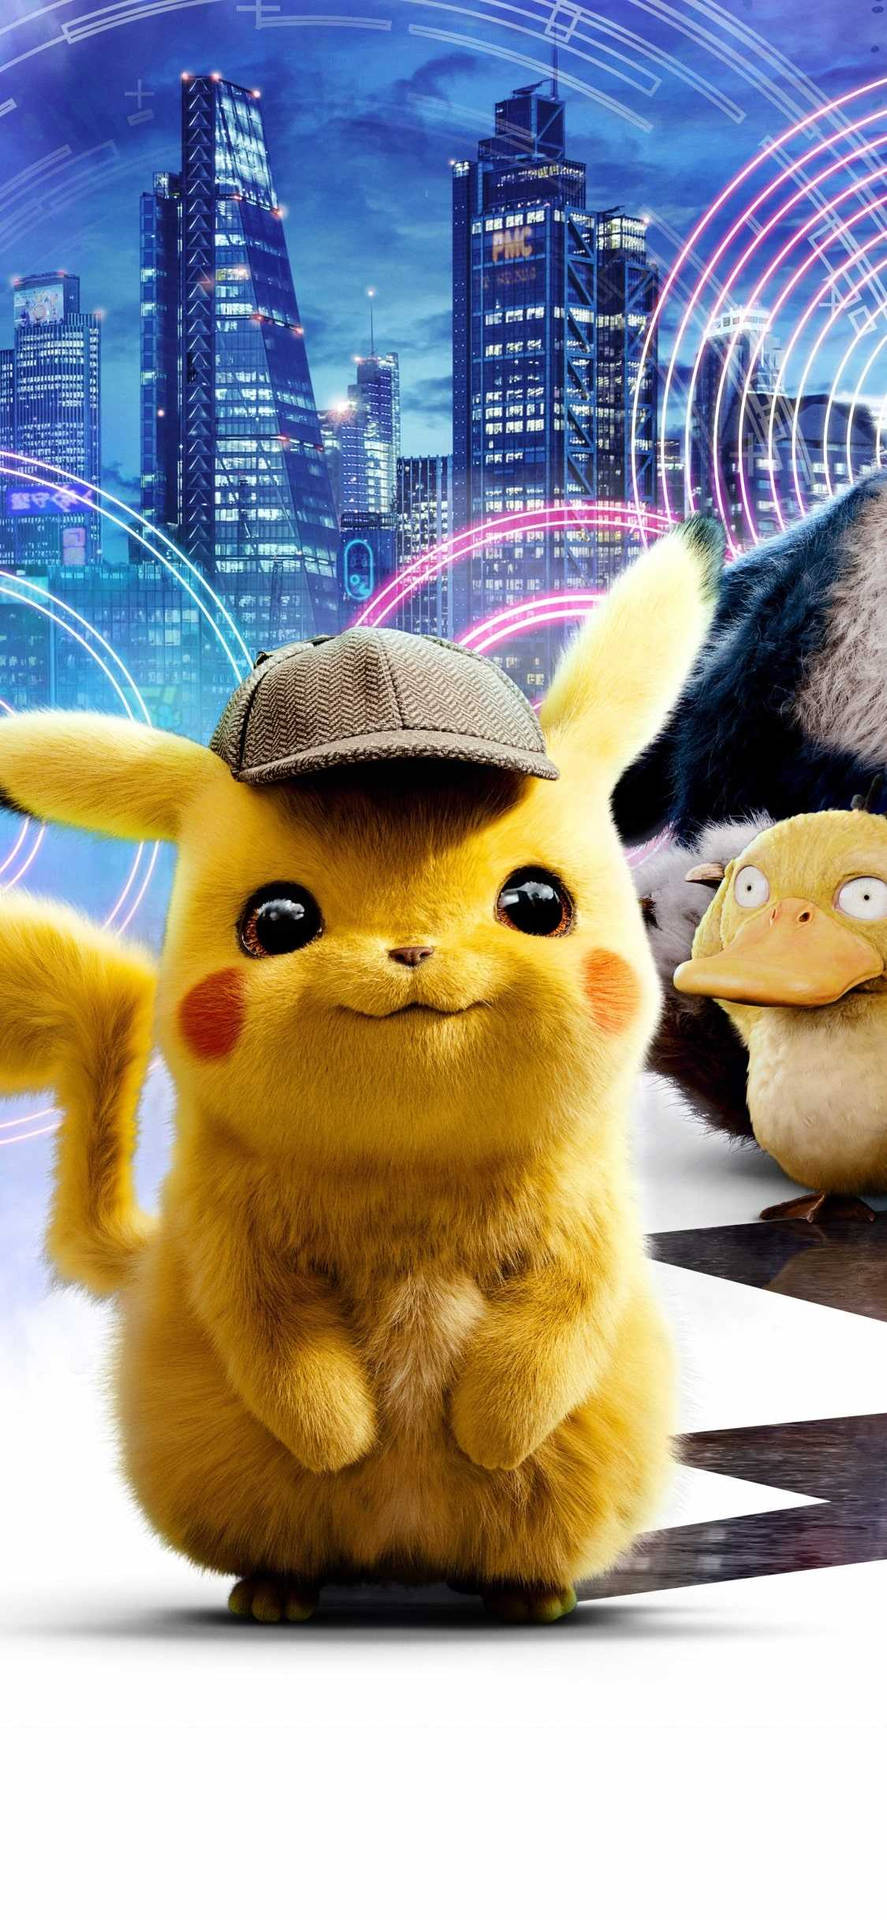 Download Pikachu And Psyduck Wallpaper 